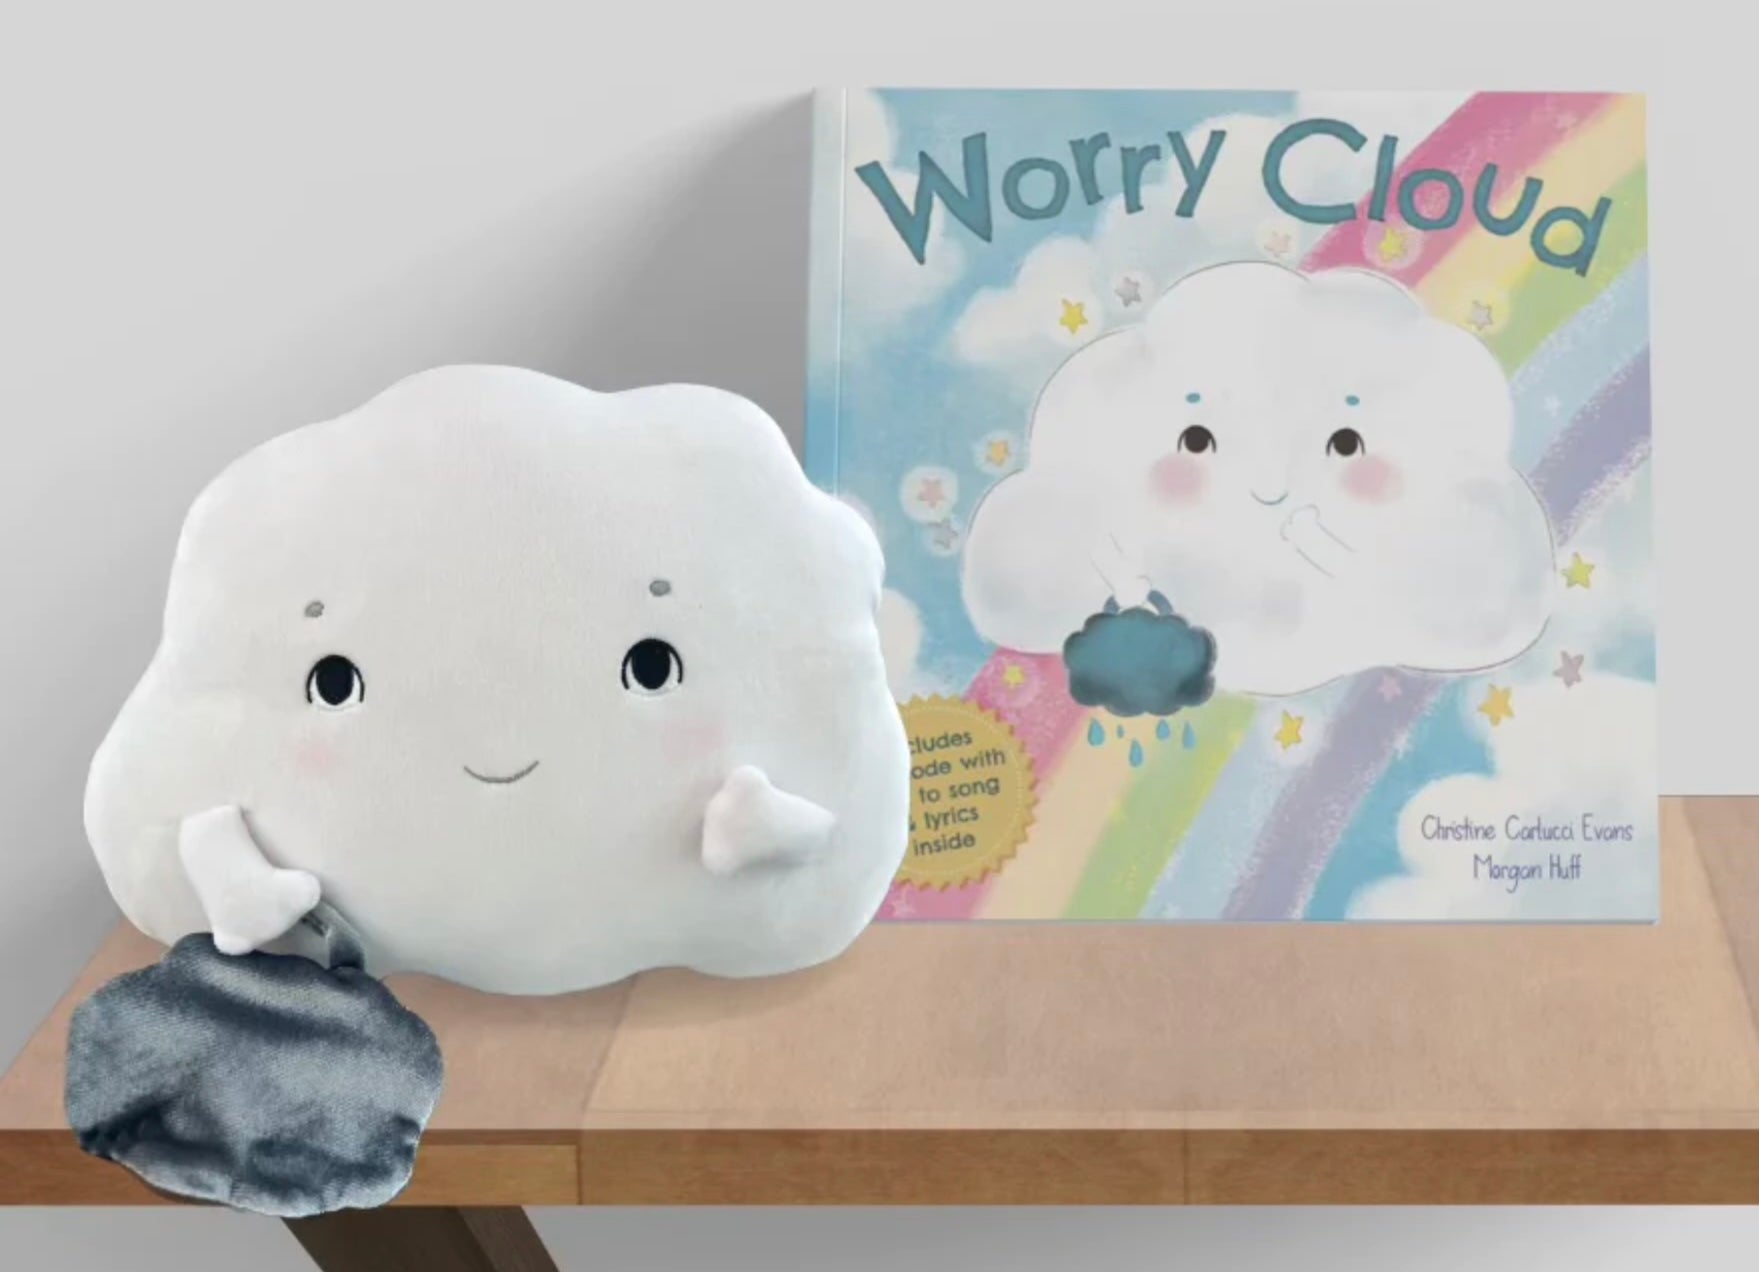 Cloud Plush for Worry Cloud Book